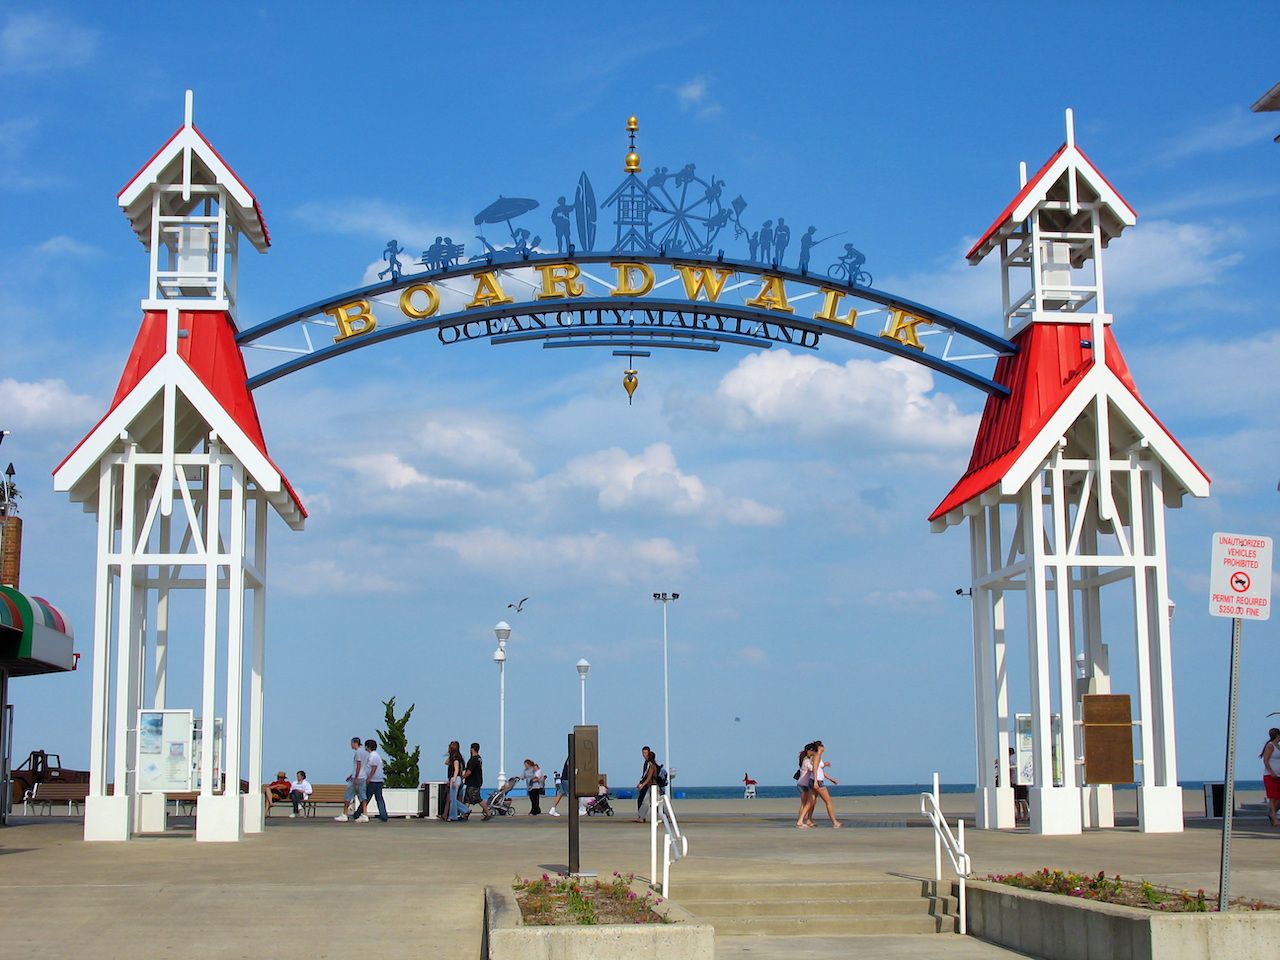 The famous public BOARDWALK sign located at the main entrance of the boardwalk in Ocean City, Maryland. - Image